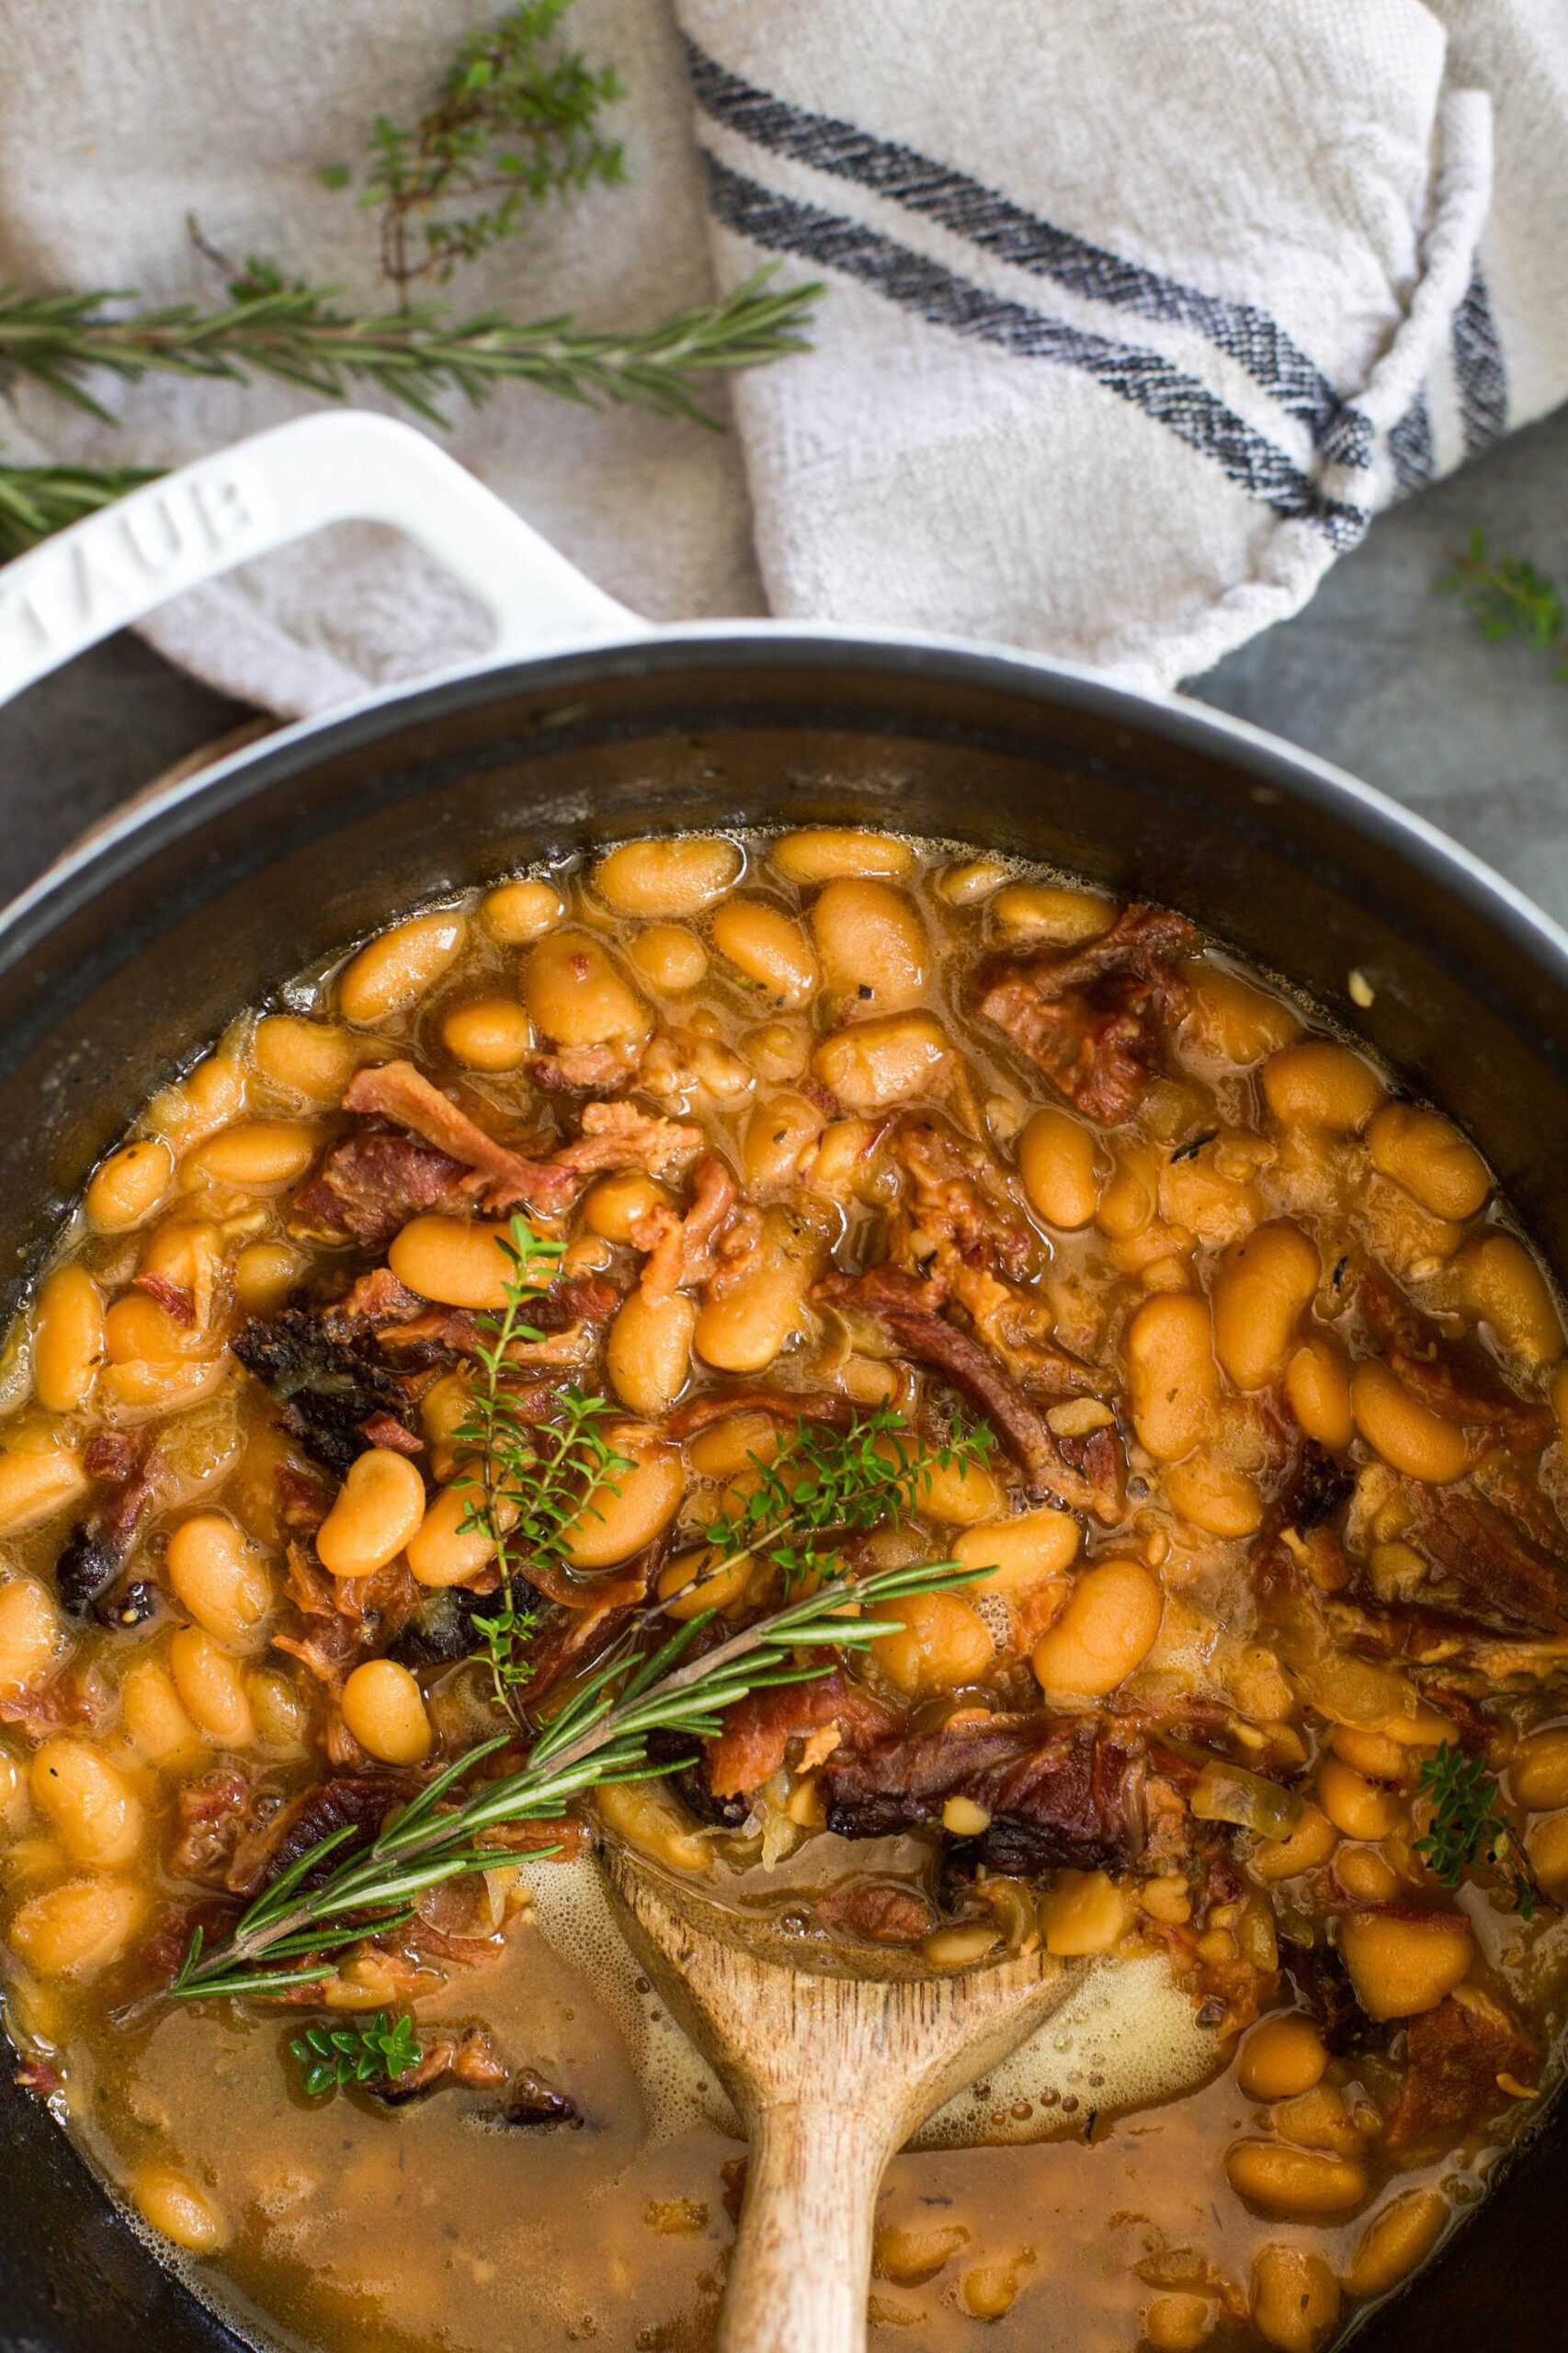  These white beans are packed with flavor from aromatic herbs and spices.